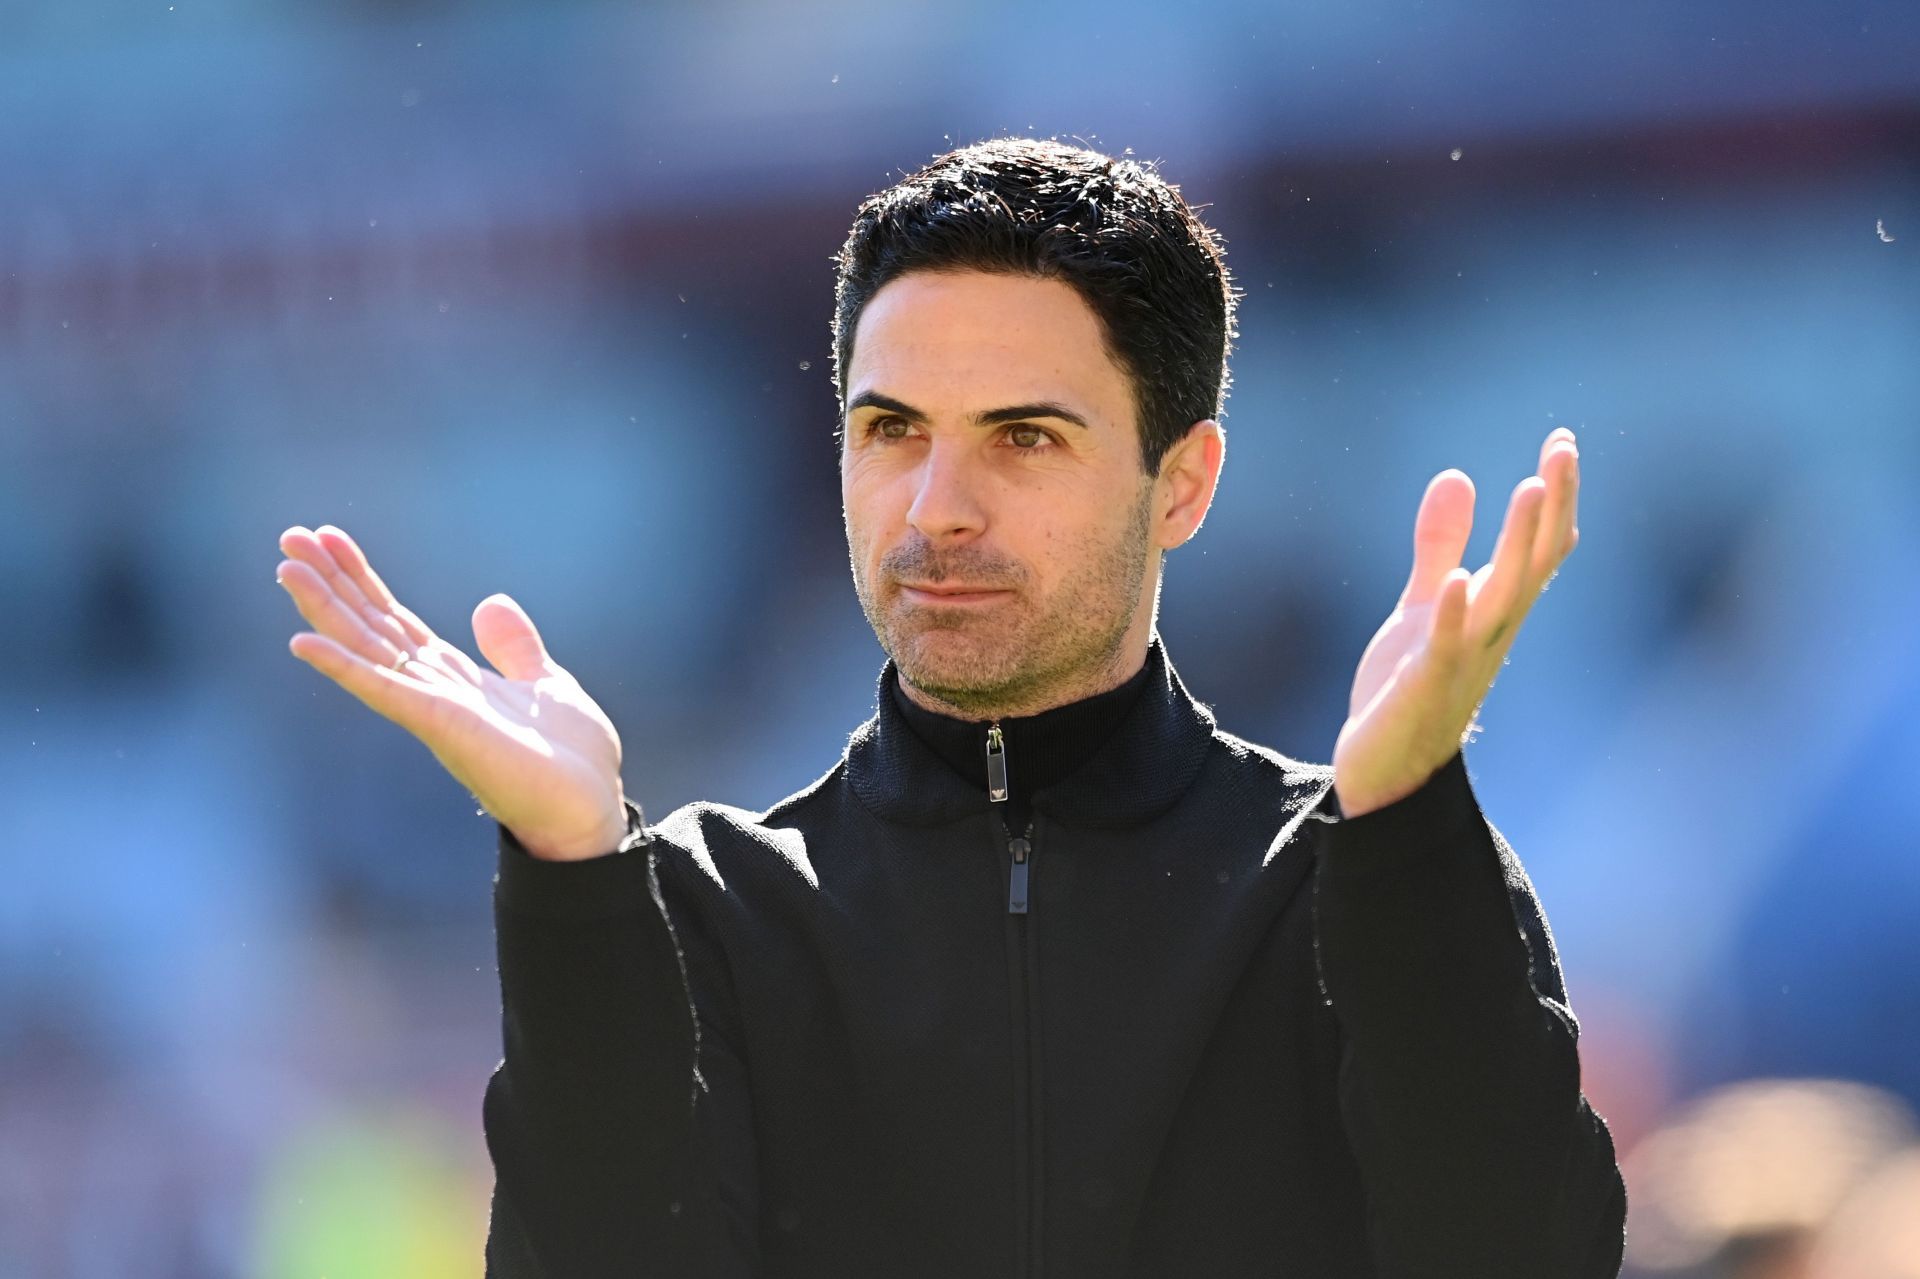 Arsenal manager Mikel Arteta has guided his team to back-to-back wins.